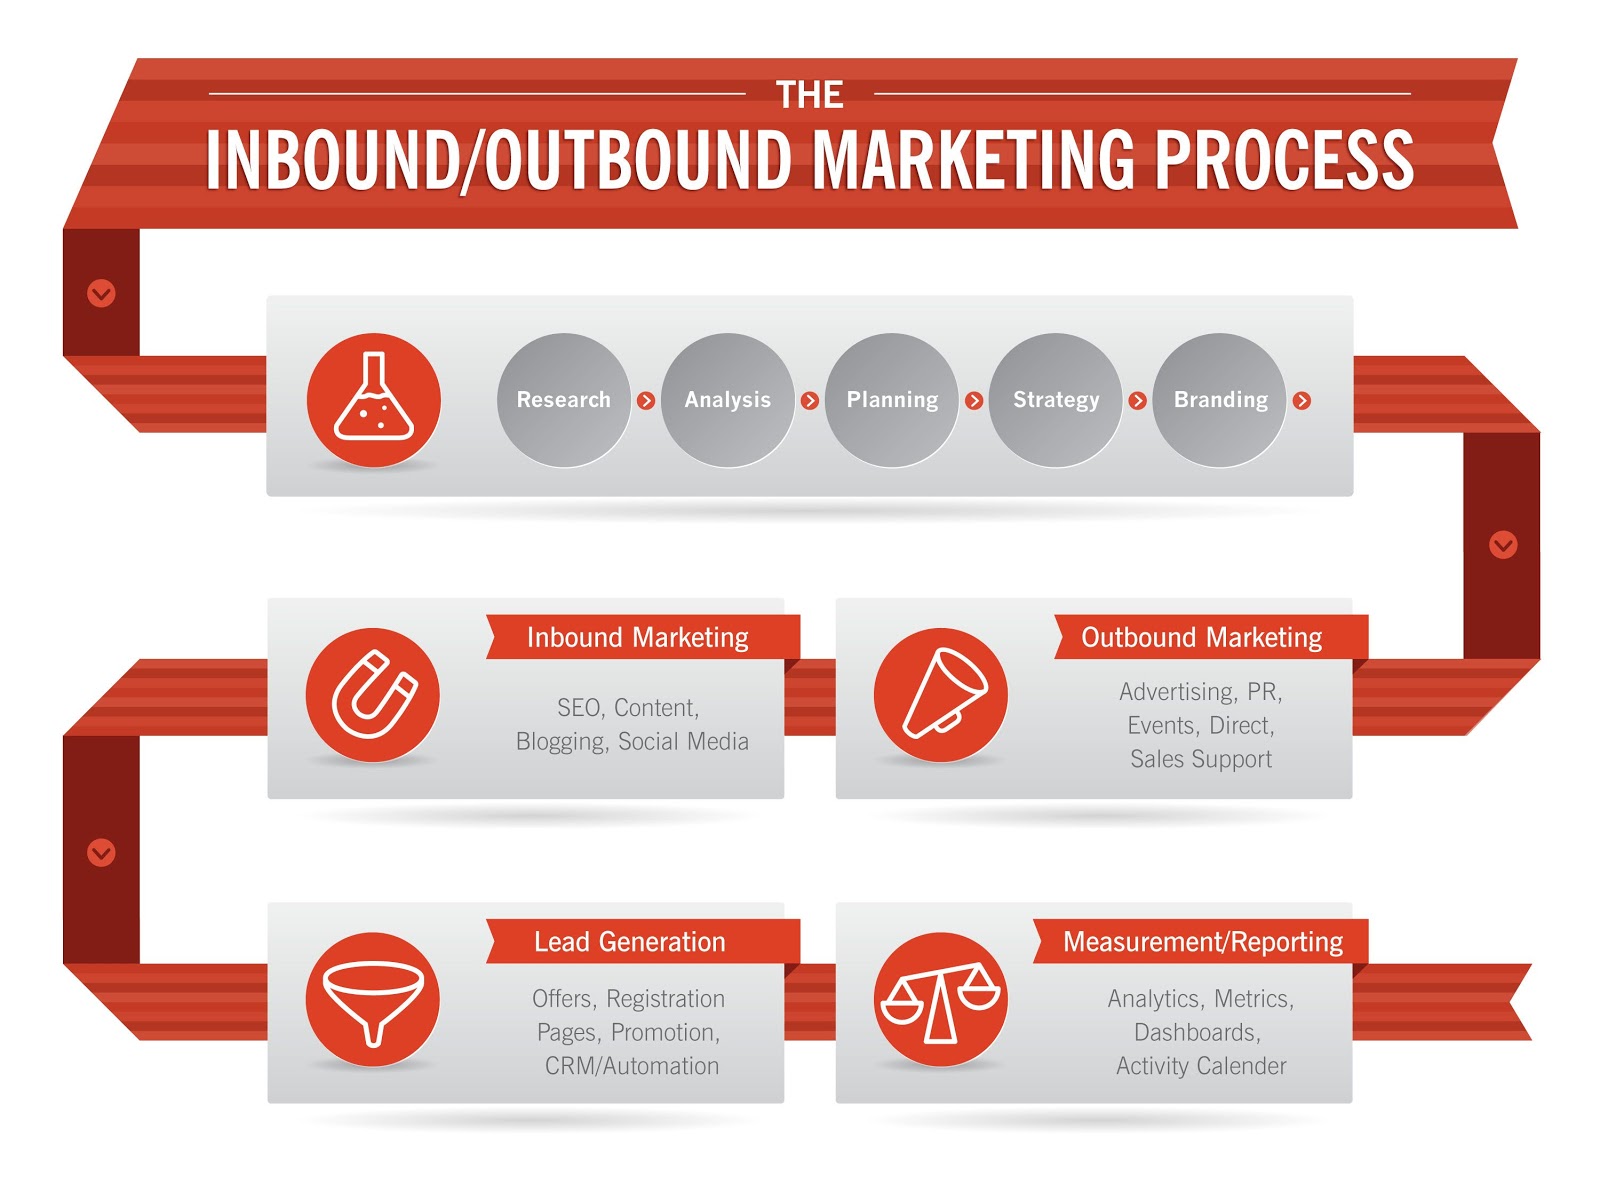 inbound lead generation - overview of the inbound and outbound marketing process